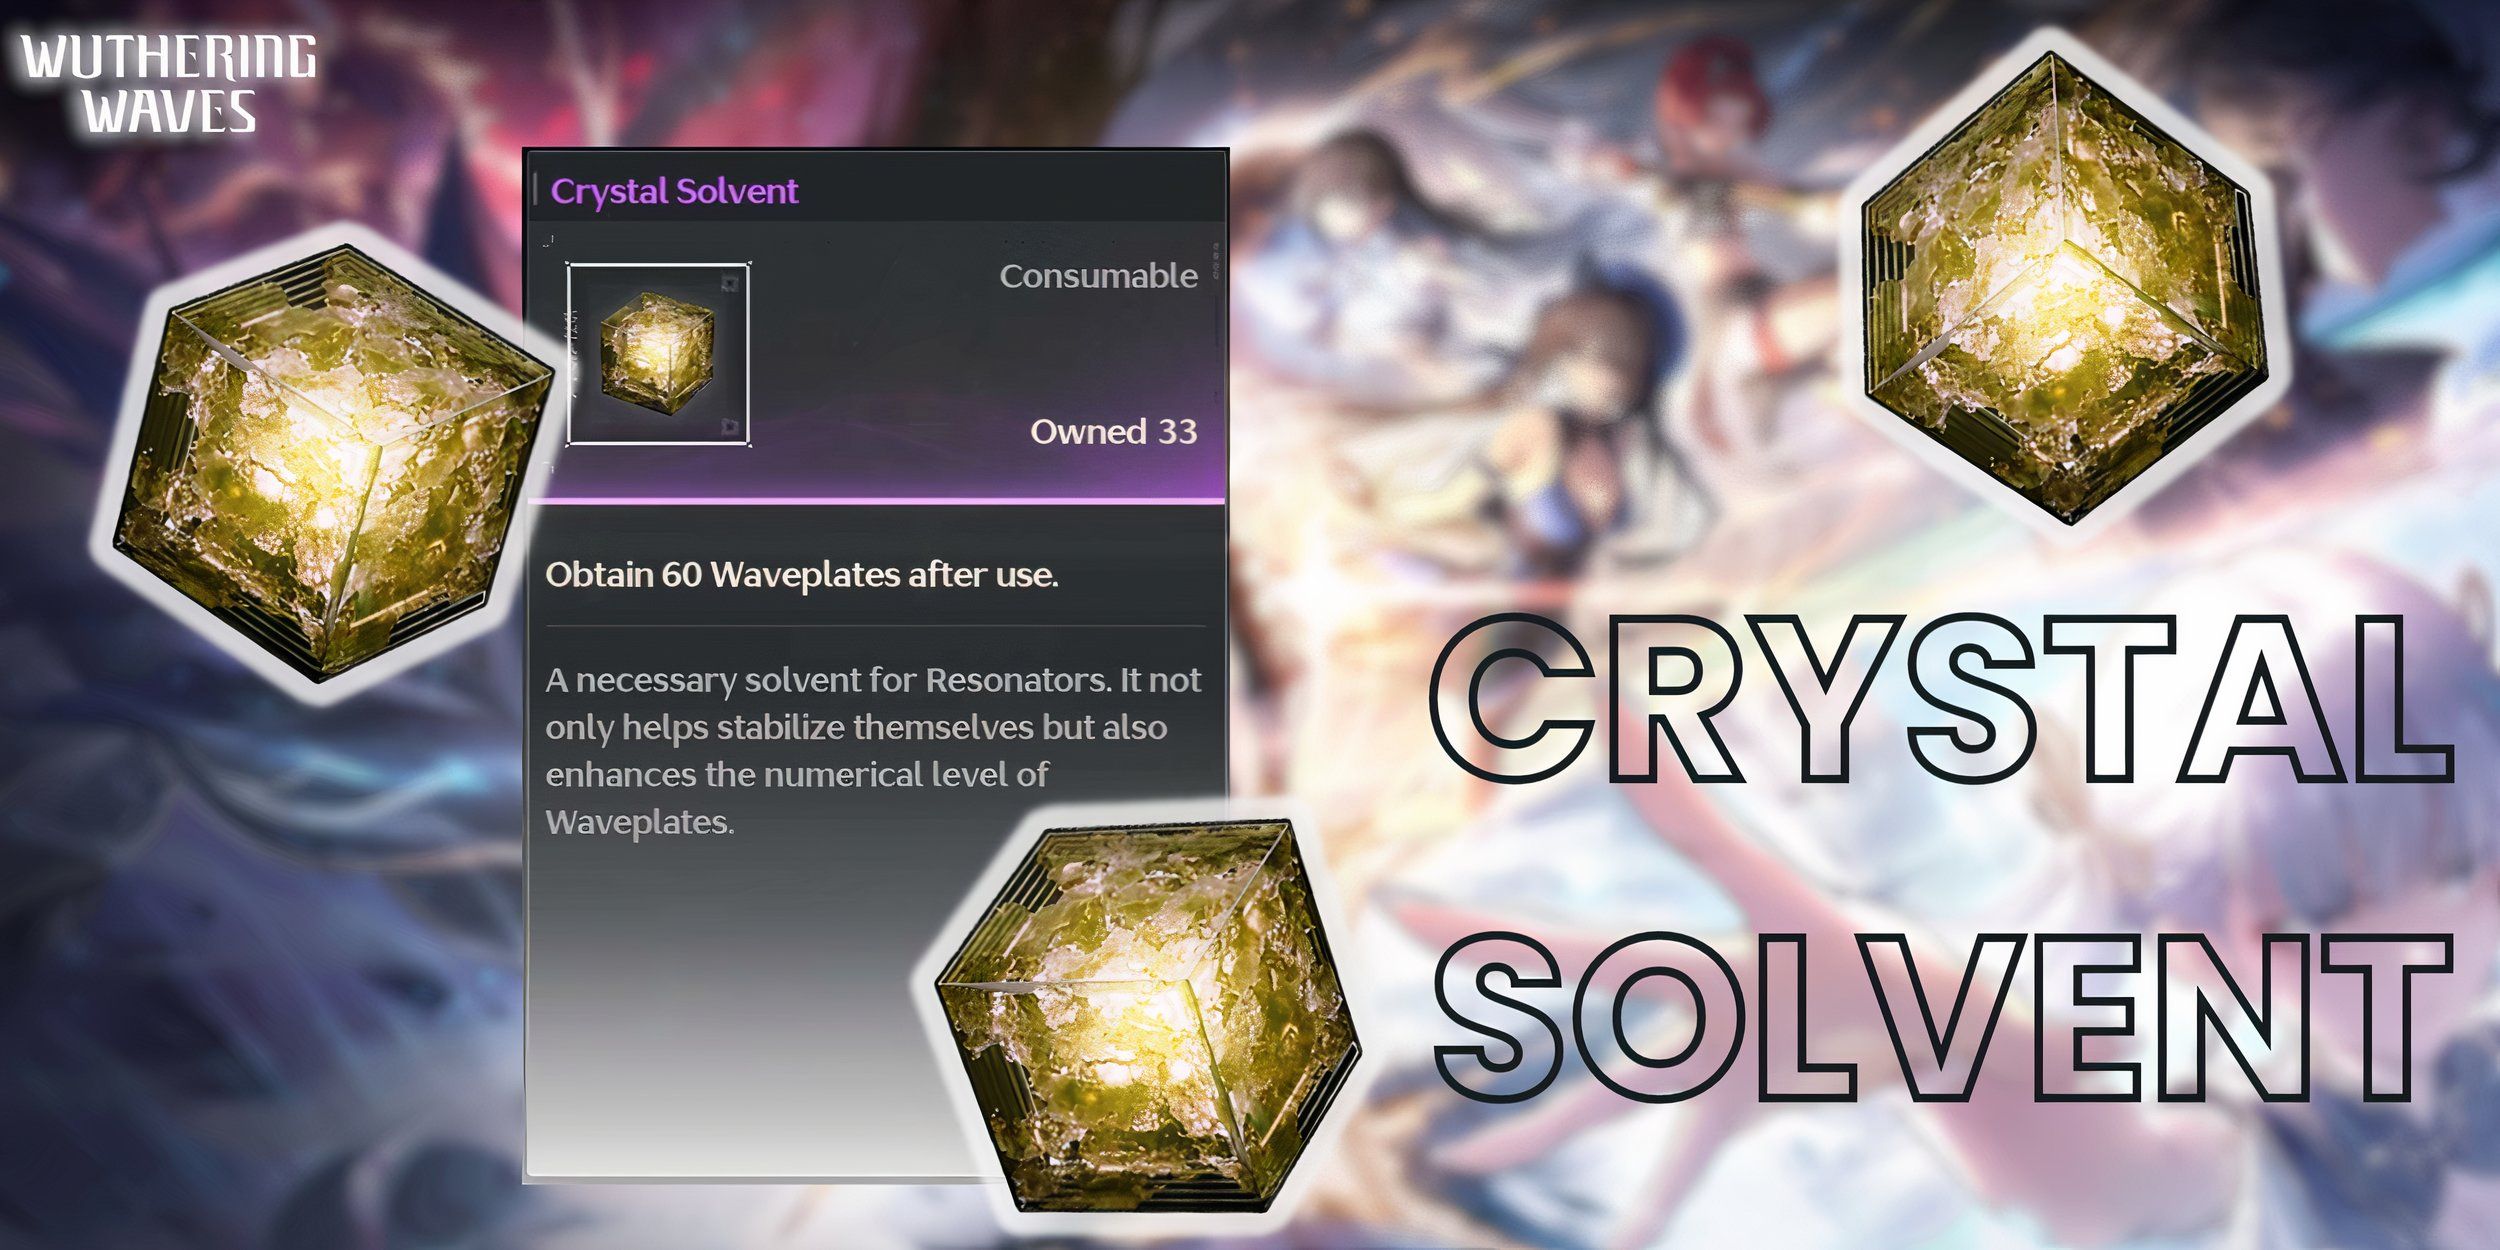 Wuthering Waves_ How to Get and Use Crystal Solvent